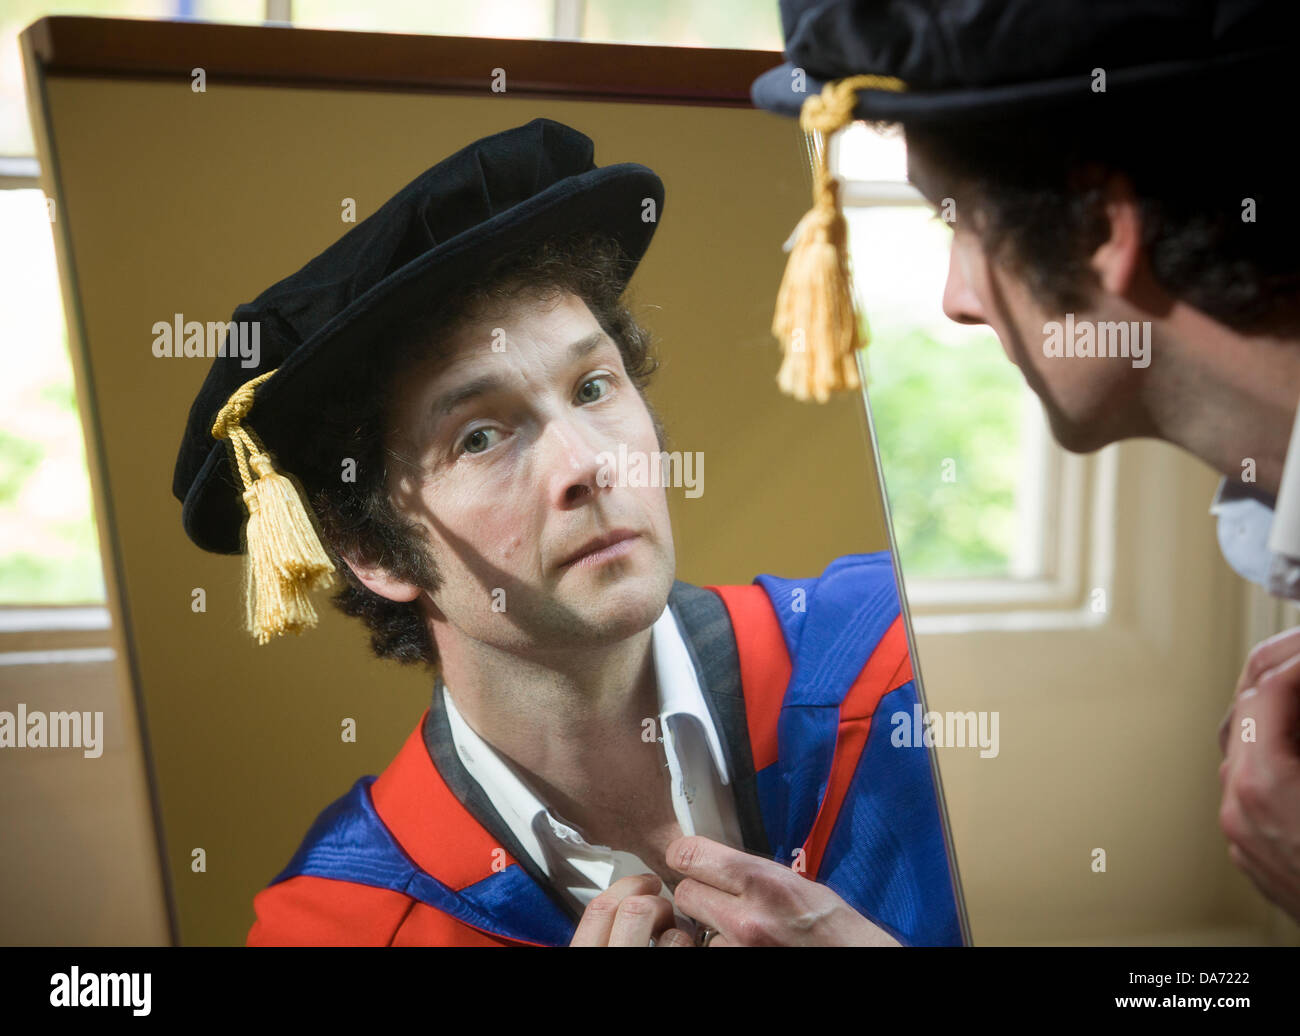 Birmingham, UK, 5th July 2013.  British comedian and actor Chris Addison in his cap and gown robes before getting an honorary degree from University of Birmingham.  Chris Addison is know for his role in Mock the Week and the TV series The Thick of It. Credit:  John James/Alamy Live News Stock Photo